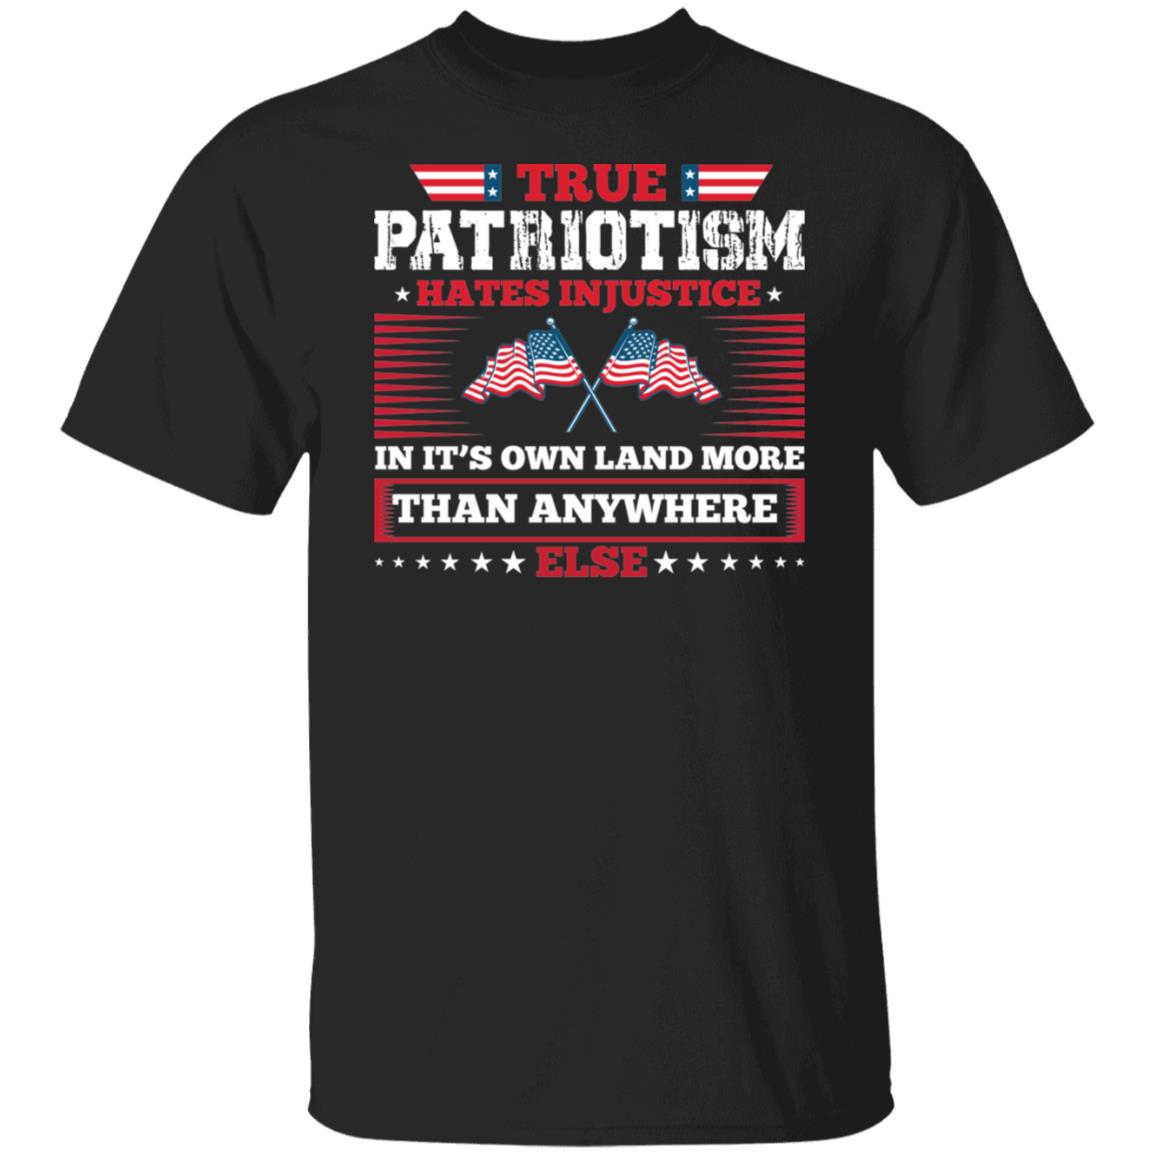 True Patriotism Hates Injustice in It's Own Land More Than Anywhere Else Shirt